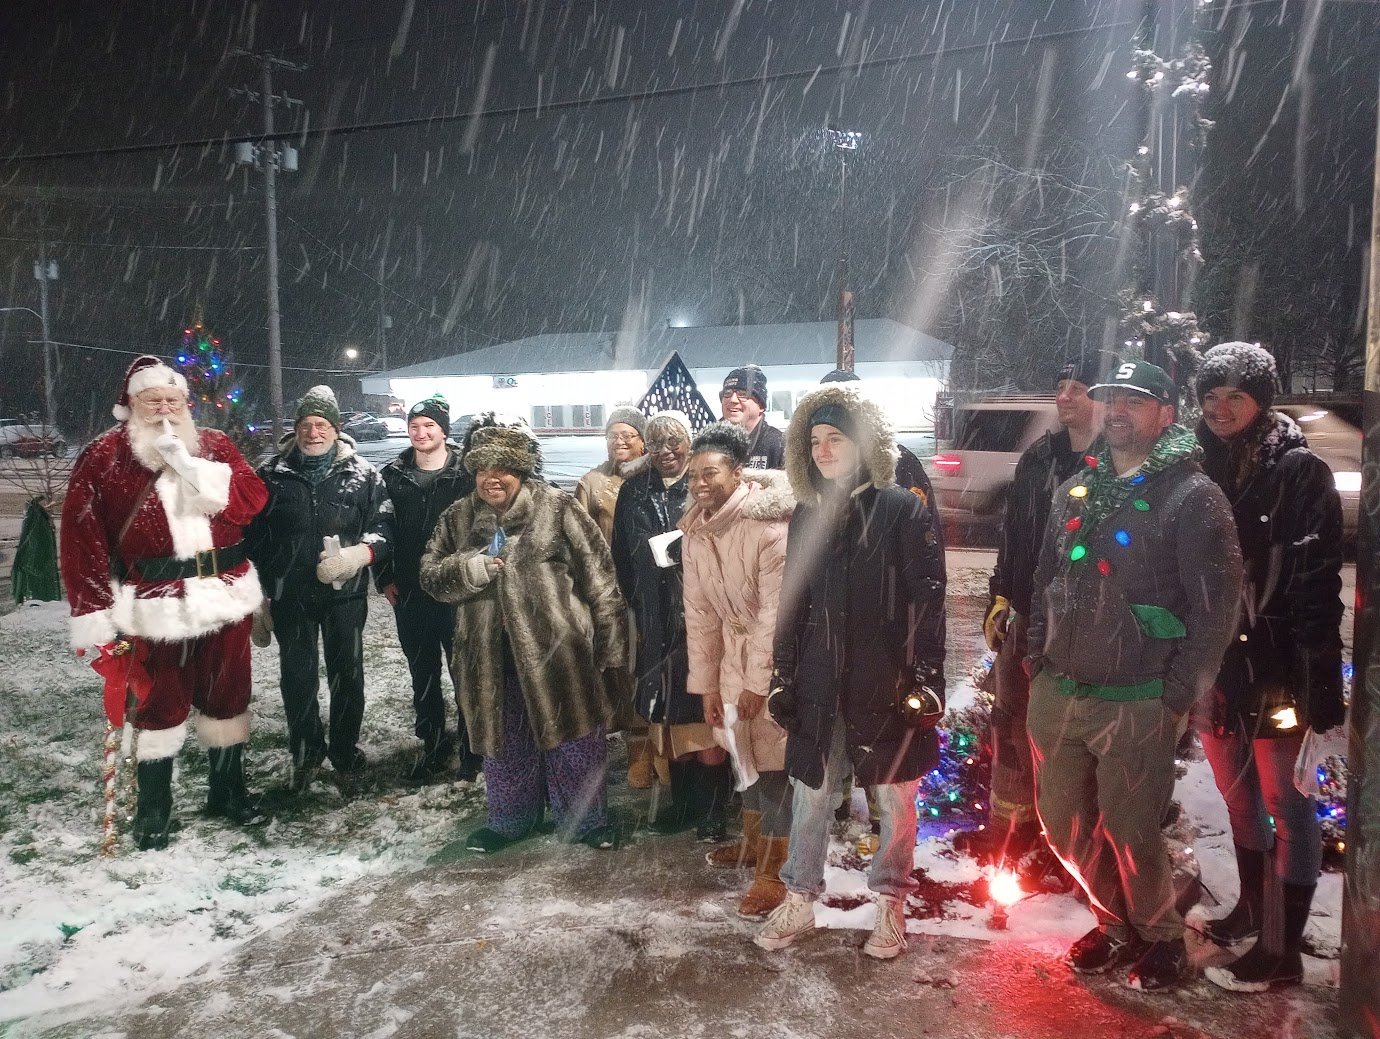 Santa Claus and Lansing residents gathered in the snow to sing carols and light the holiday lights in the Plaza located at the corner of Pleasant Grove Rd. and Holmes Rd. in southwest Lansing. The event was sponsored by Southwest Lansing Action Group (SWAG).